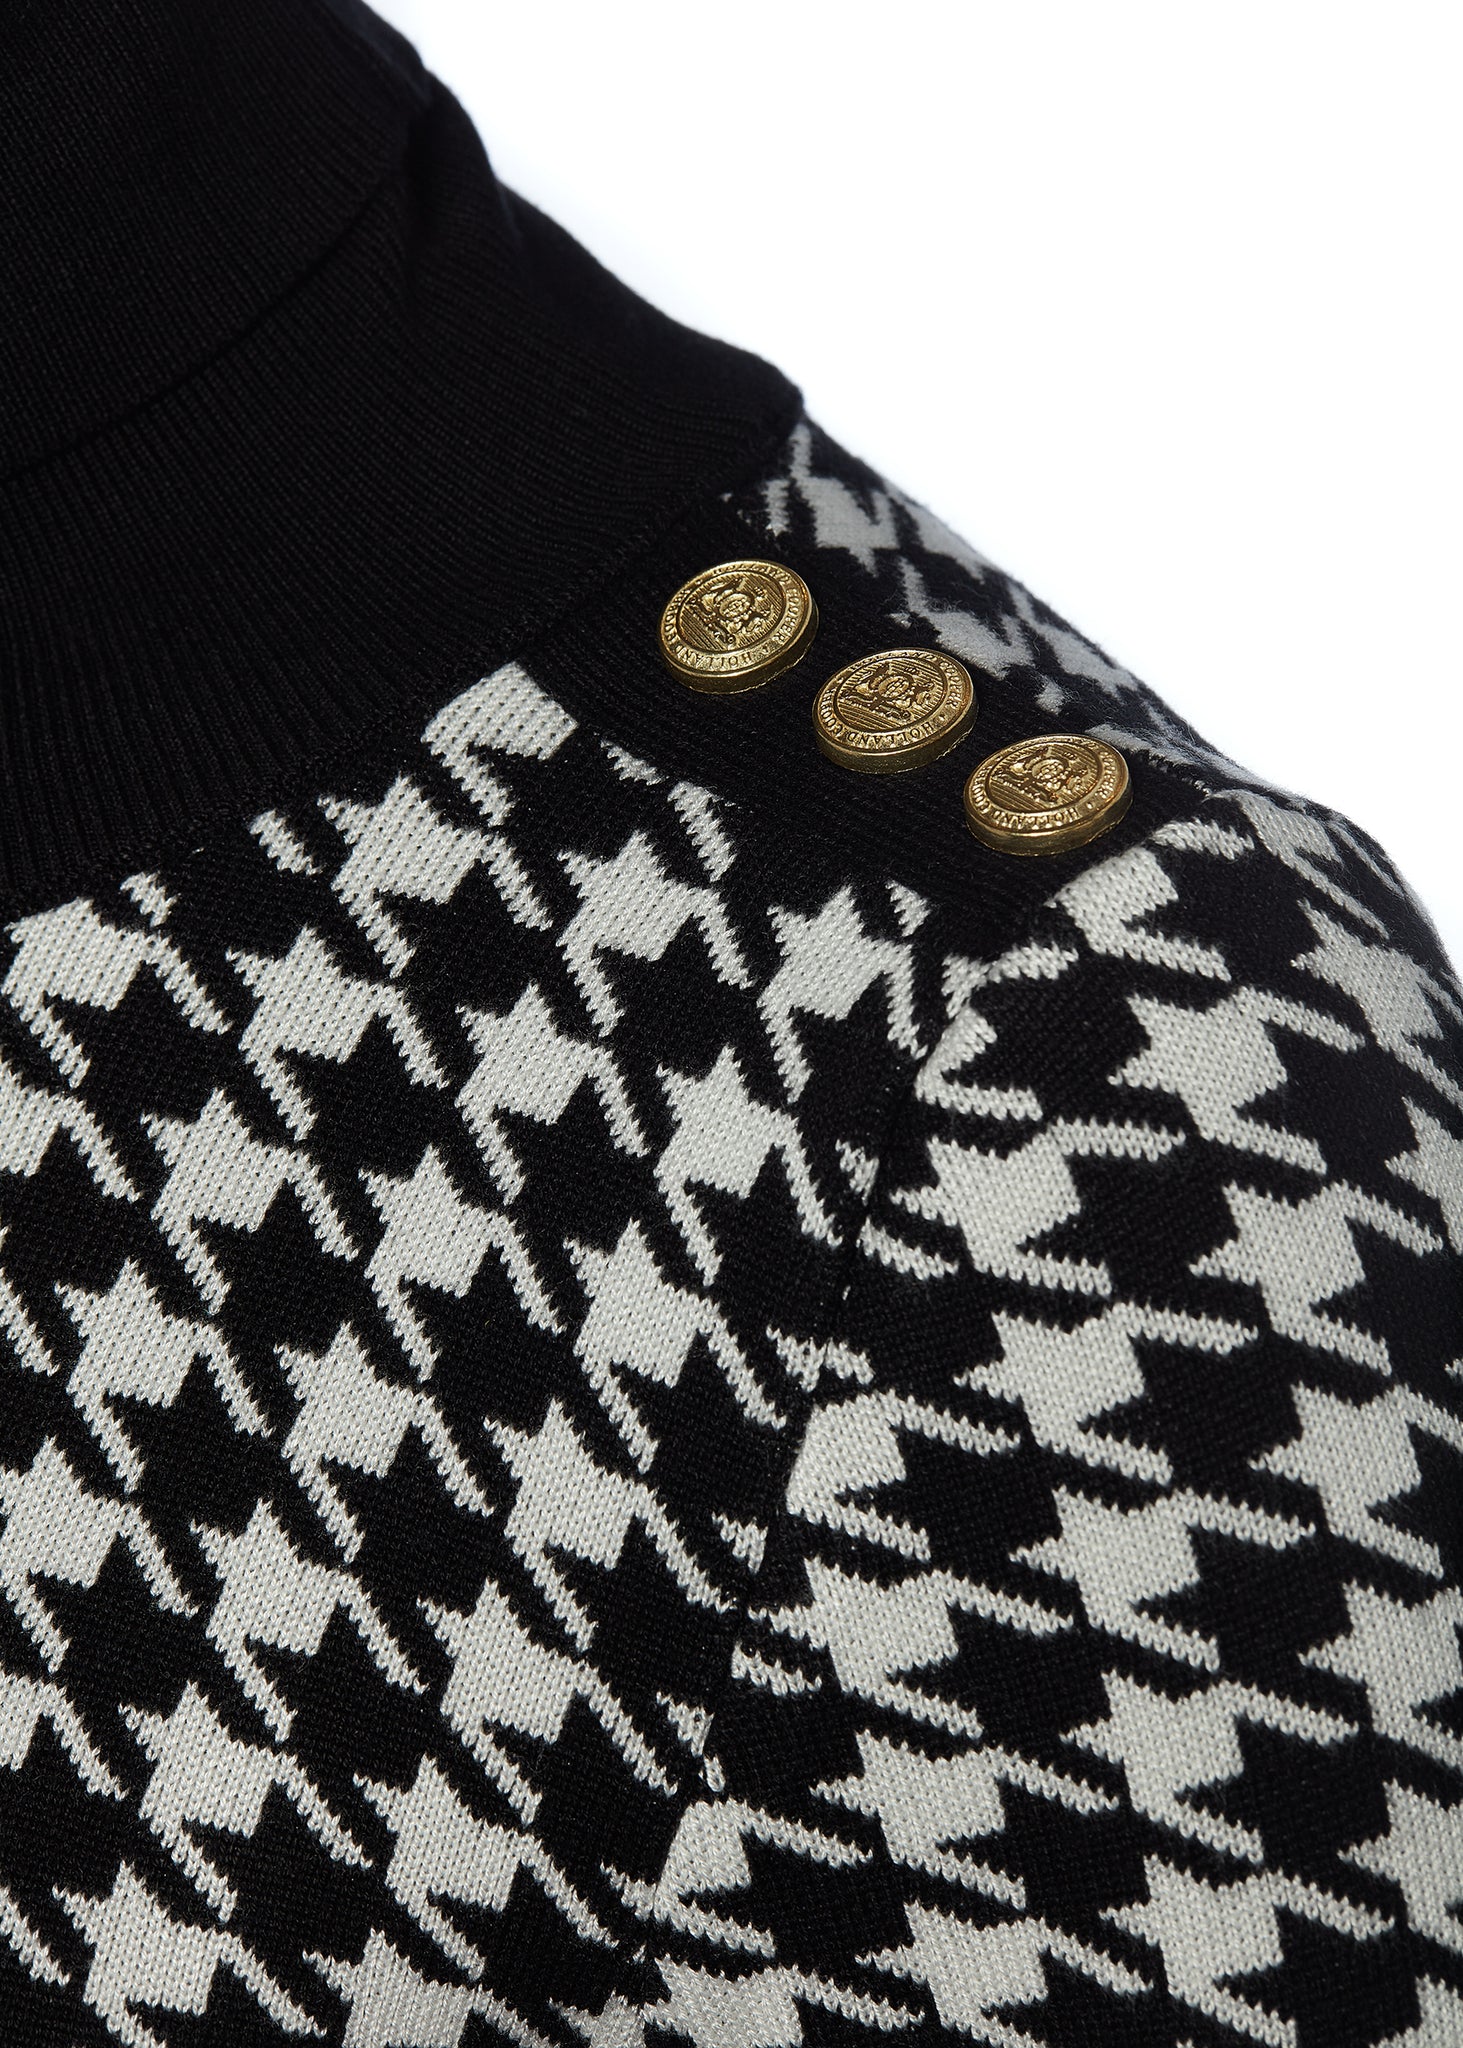 gold button detail on shoulders of a classic black and white houndstooth jumper with contrast black roll neck collar